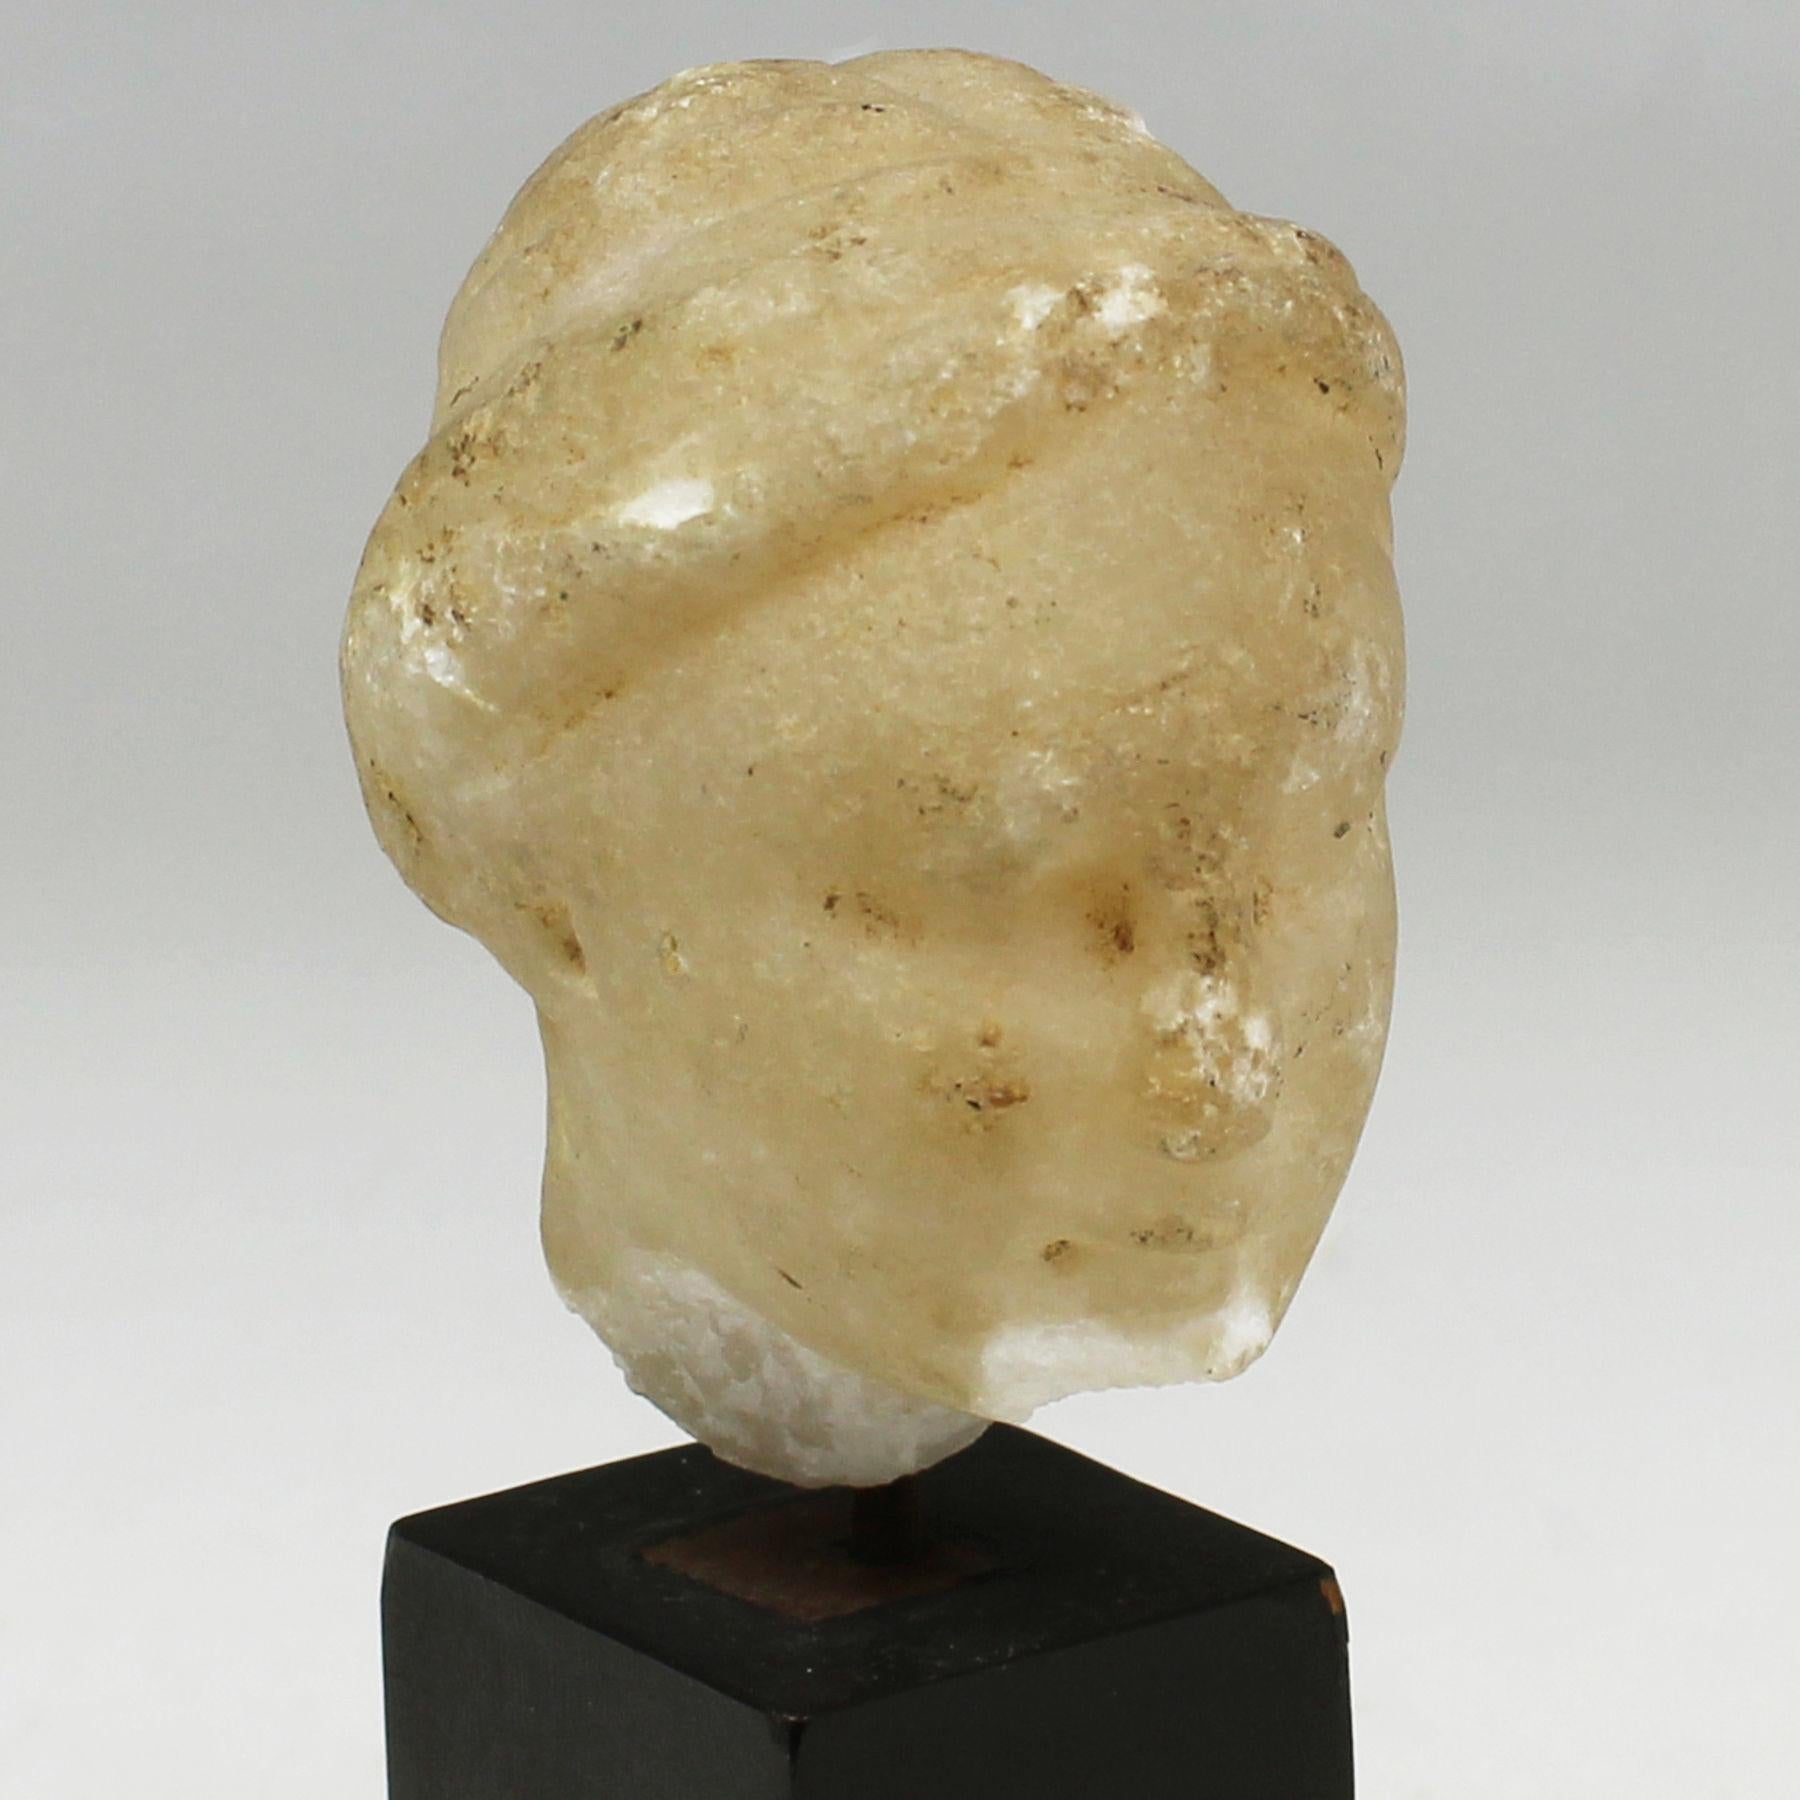 ITEM: Head
MATERIAL: Marble
CULTURE: Greek, Hellenistic period
PERIOD: 3rd – 1st Century B.C
DIMENSIONS: 55 mm x 38 mm x 44 mm
CONDITION: Good condition. Includes stand
PROVENANCE: Ex Swiss private collection, acquired since at least 1982

Comes